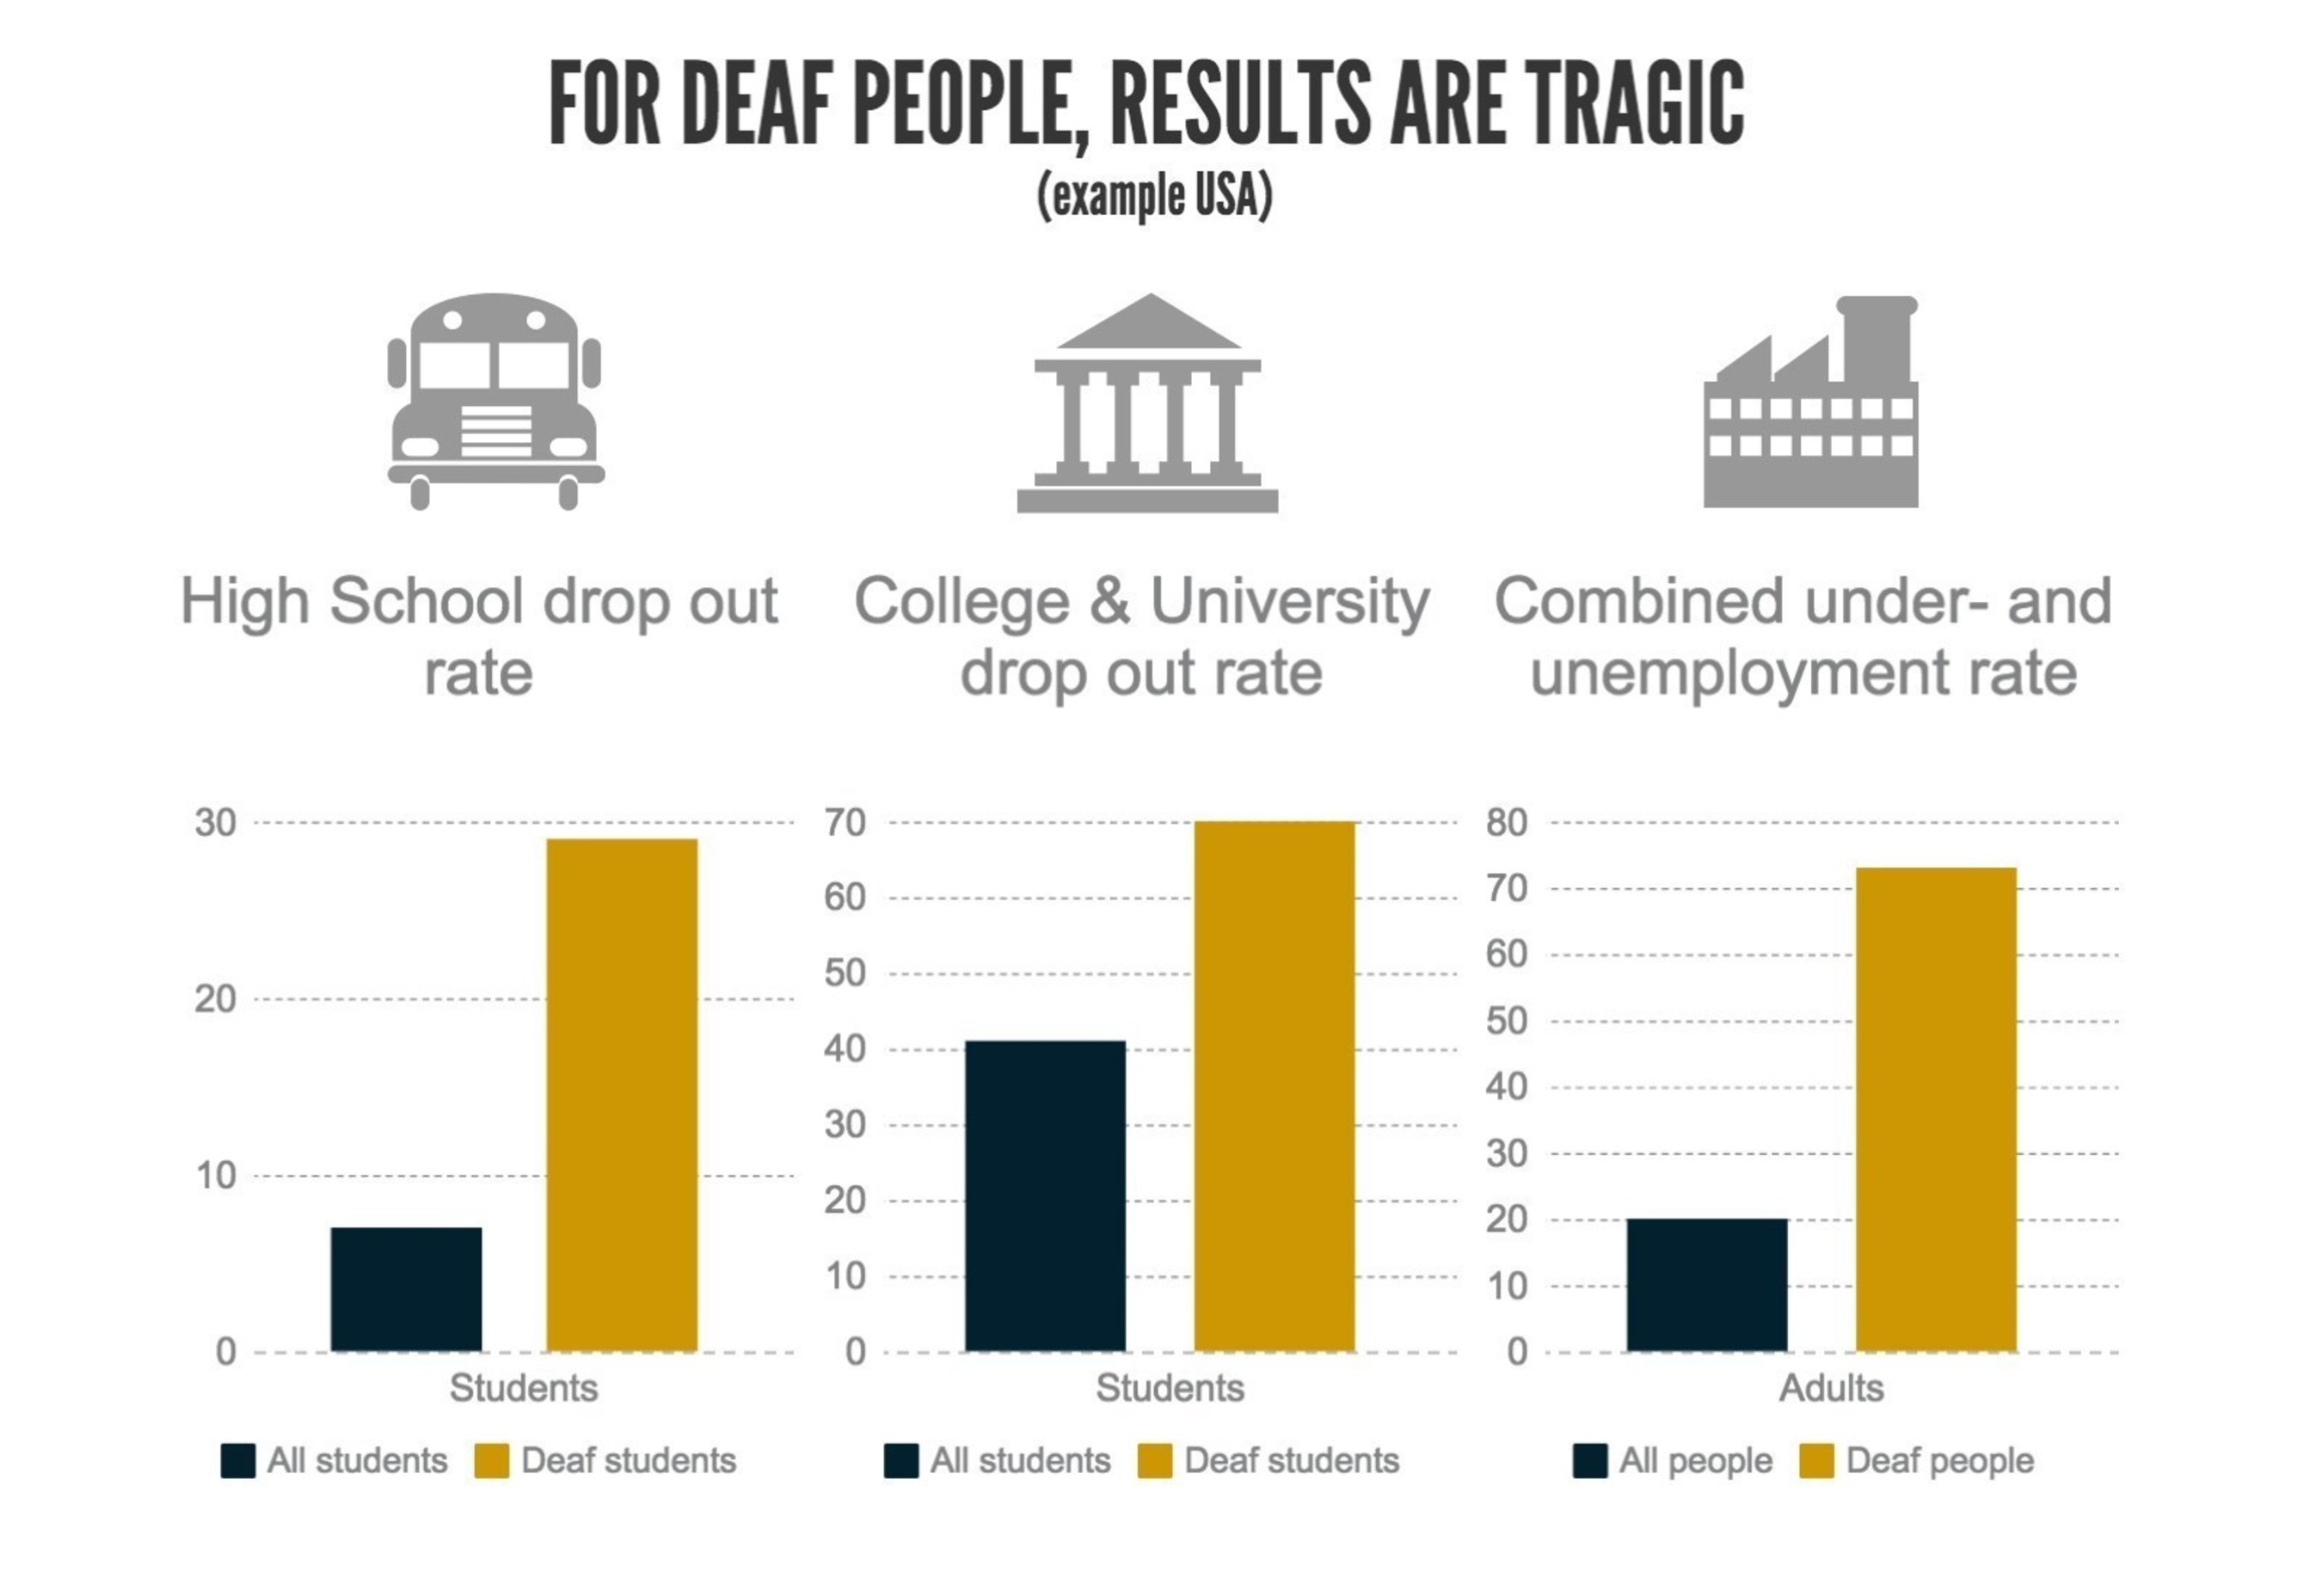 Being Deaf is a reality for 70 million people, but they are often left behind with education attainment & employability.